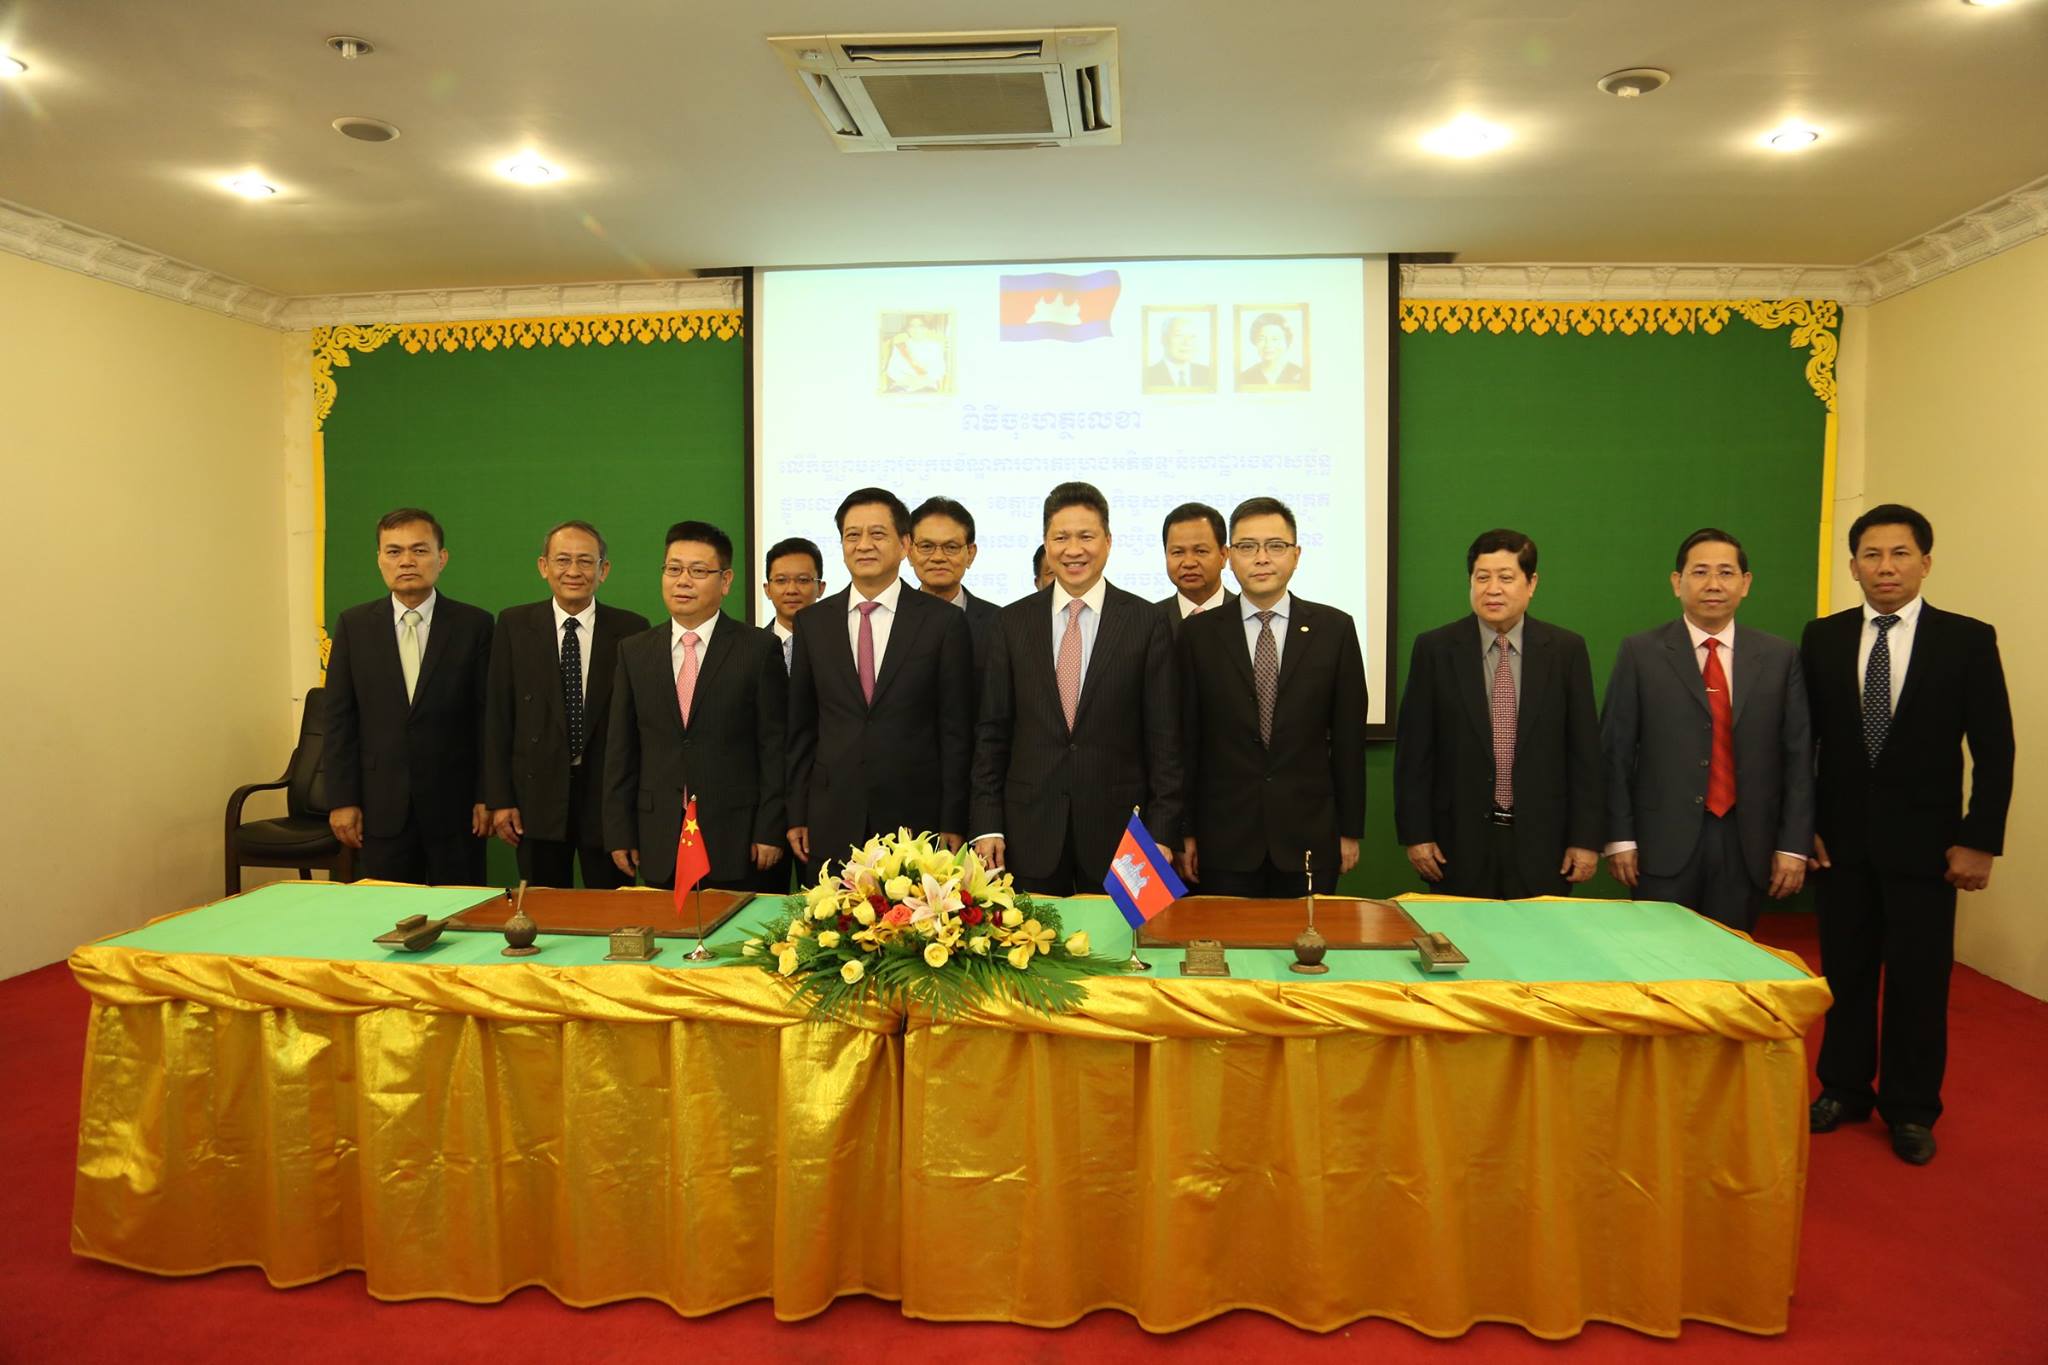 Ministry of Public Works and Transport signing of the infrastructure contracts